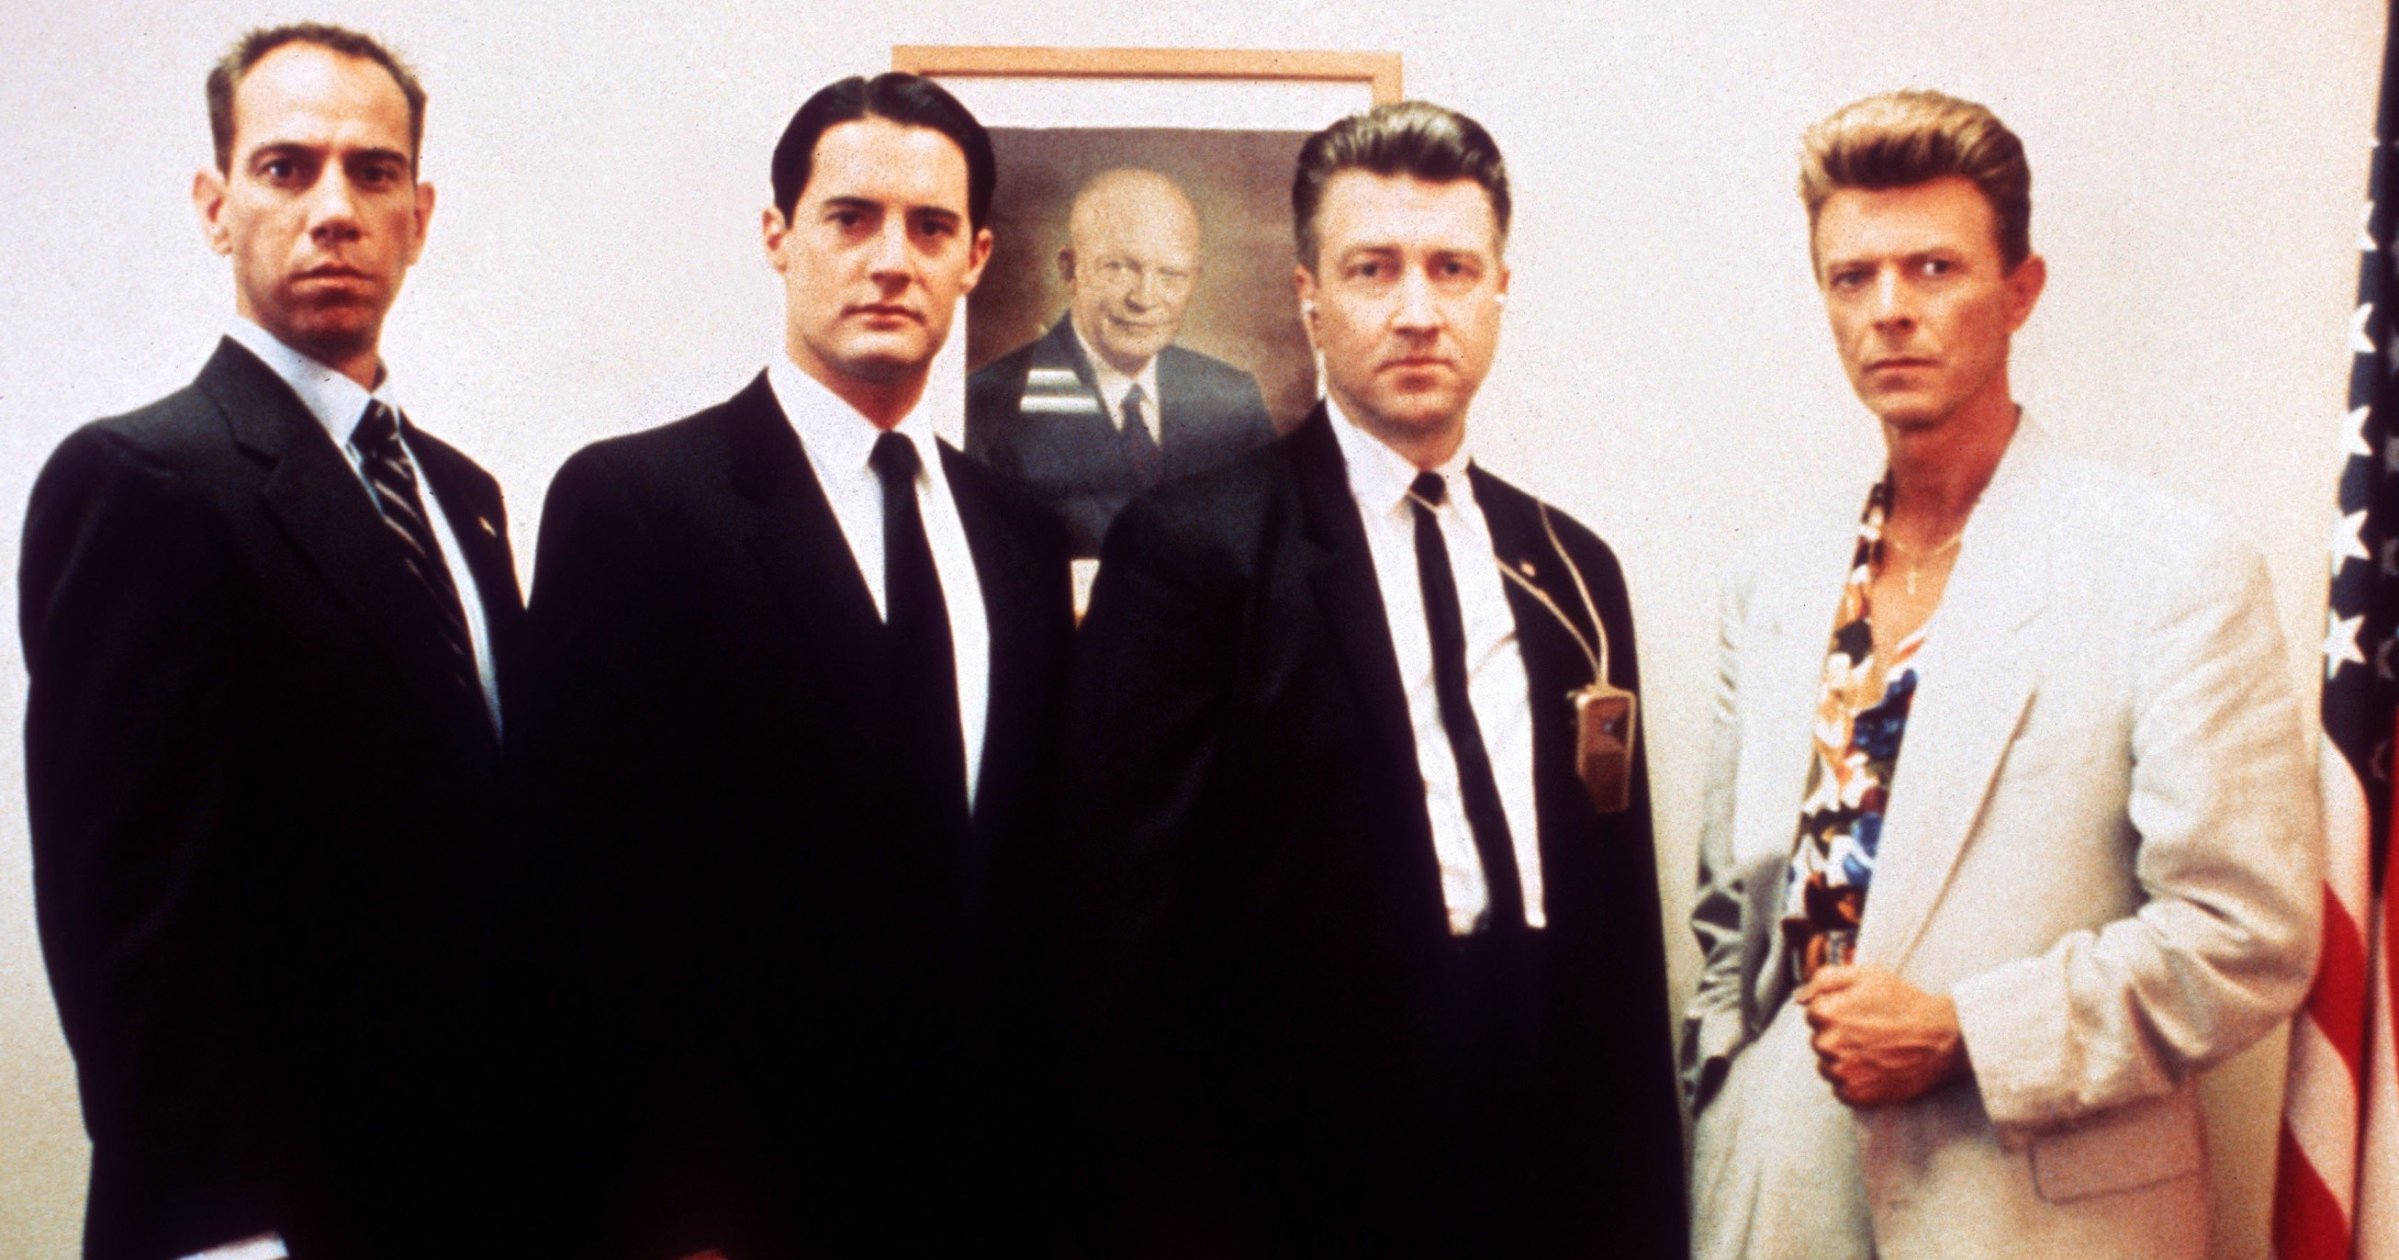 From left: Miguel Ferrer, Kyle MacLachlan, David Lynch, and David Bowie on the set of Twin Peaks: Fire Walk with Me in 1991.